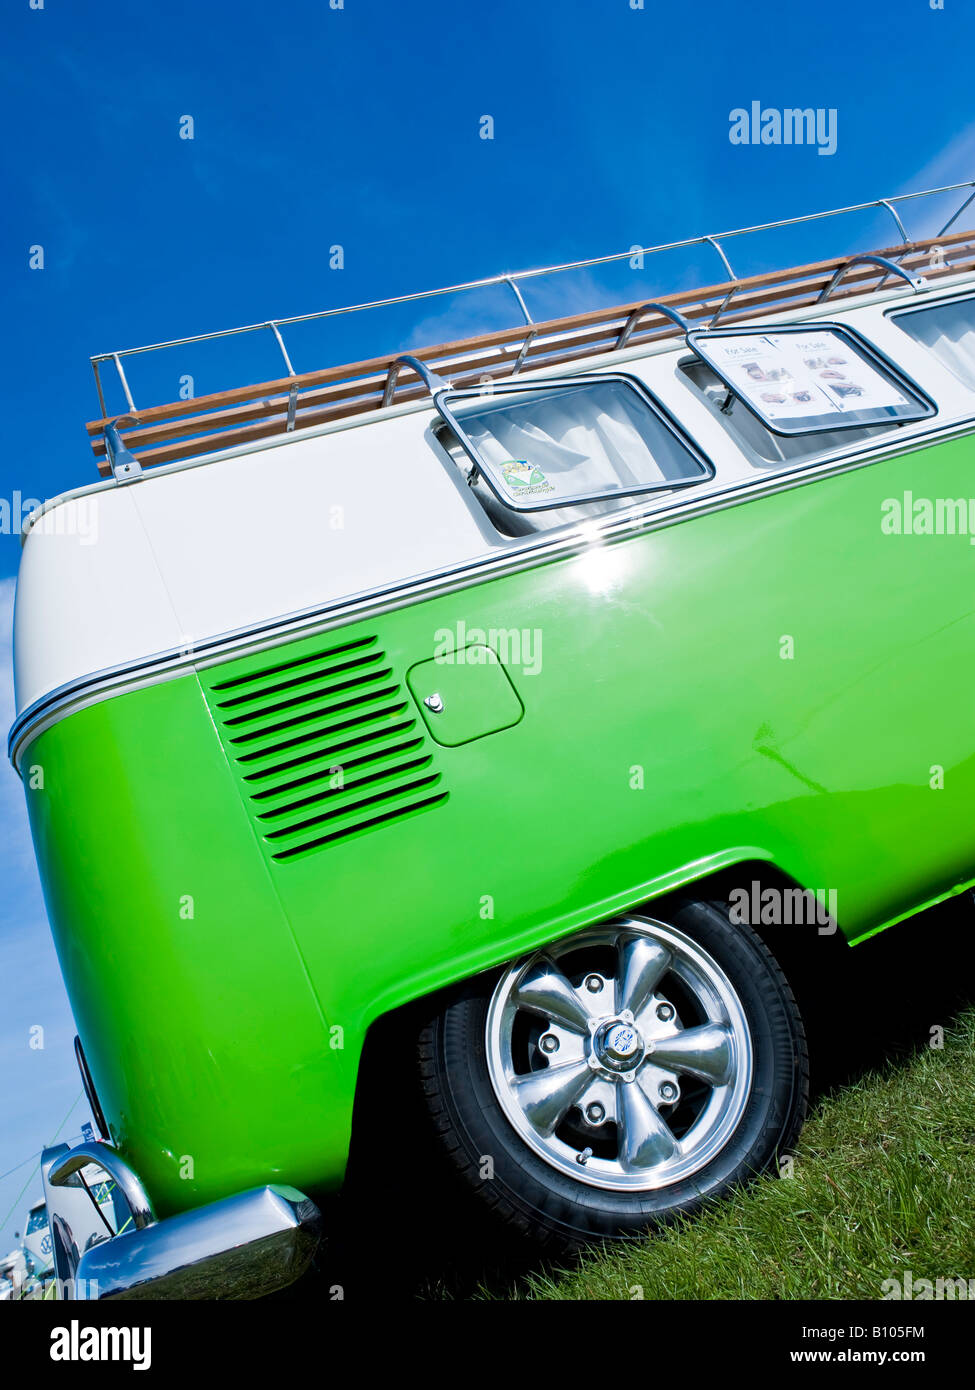 green vw volkswagen split screen camper van bus lowered modified pimped lime hippie hippy 1960s 1950s aircooled v-dub retro Stock Photo